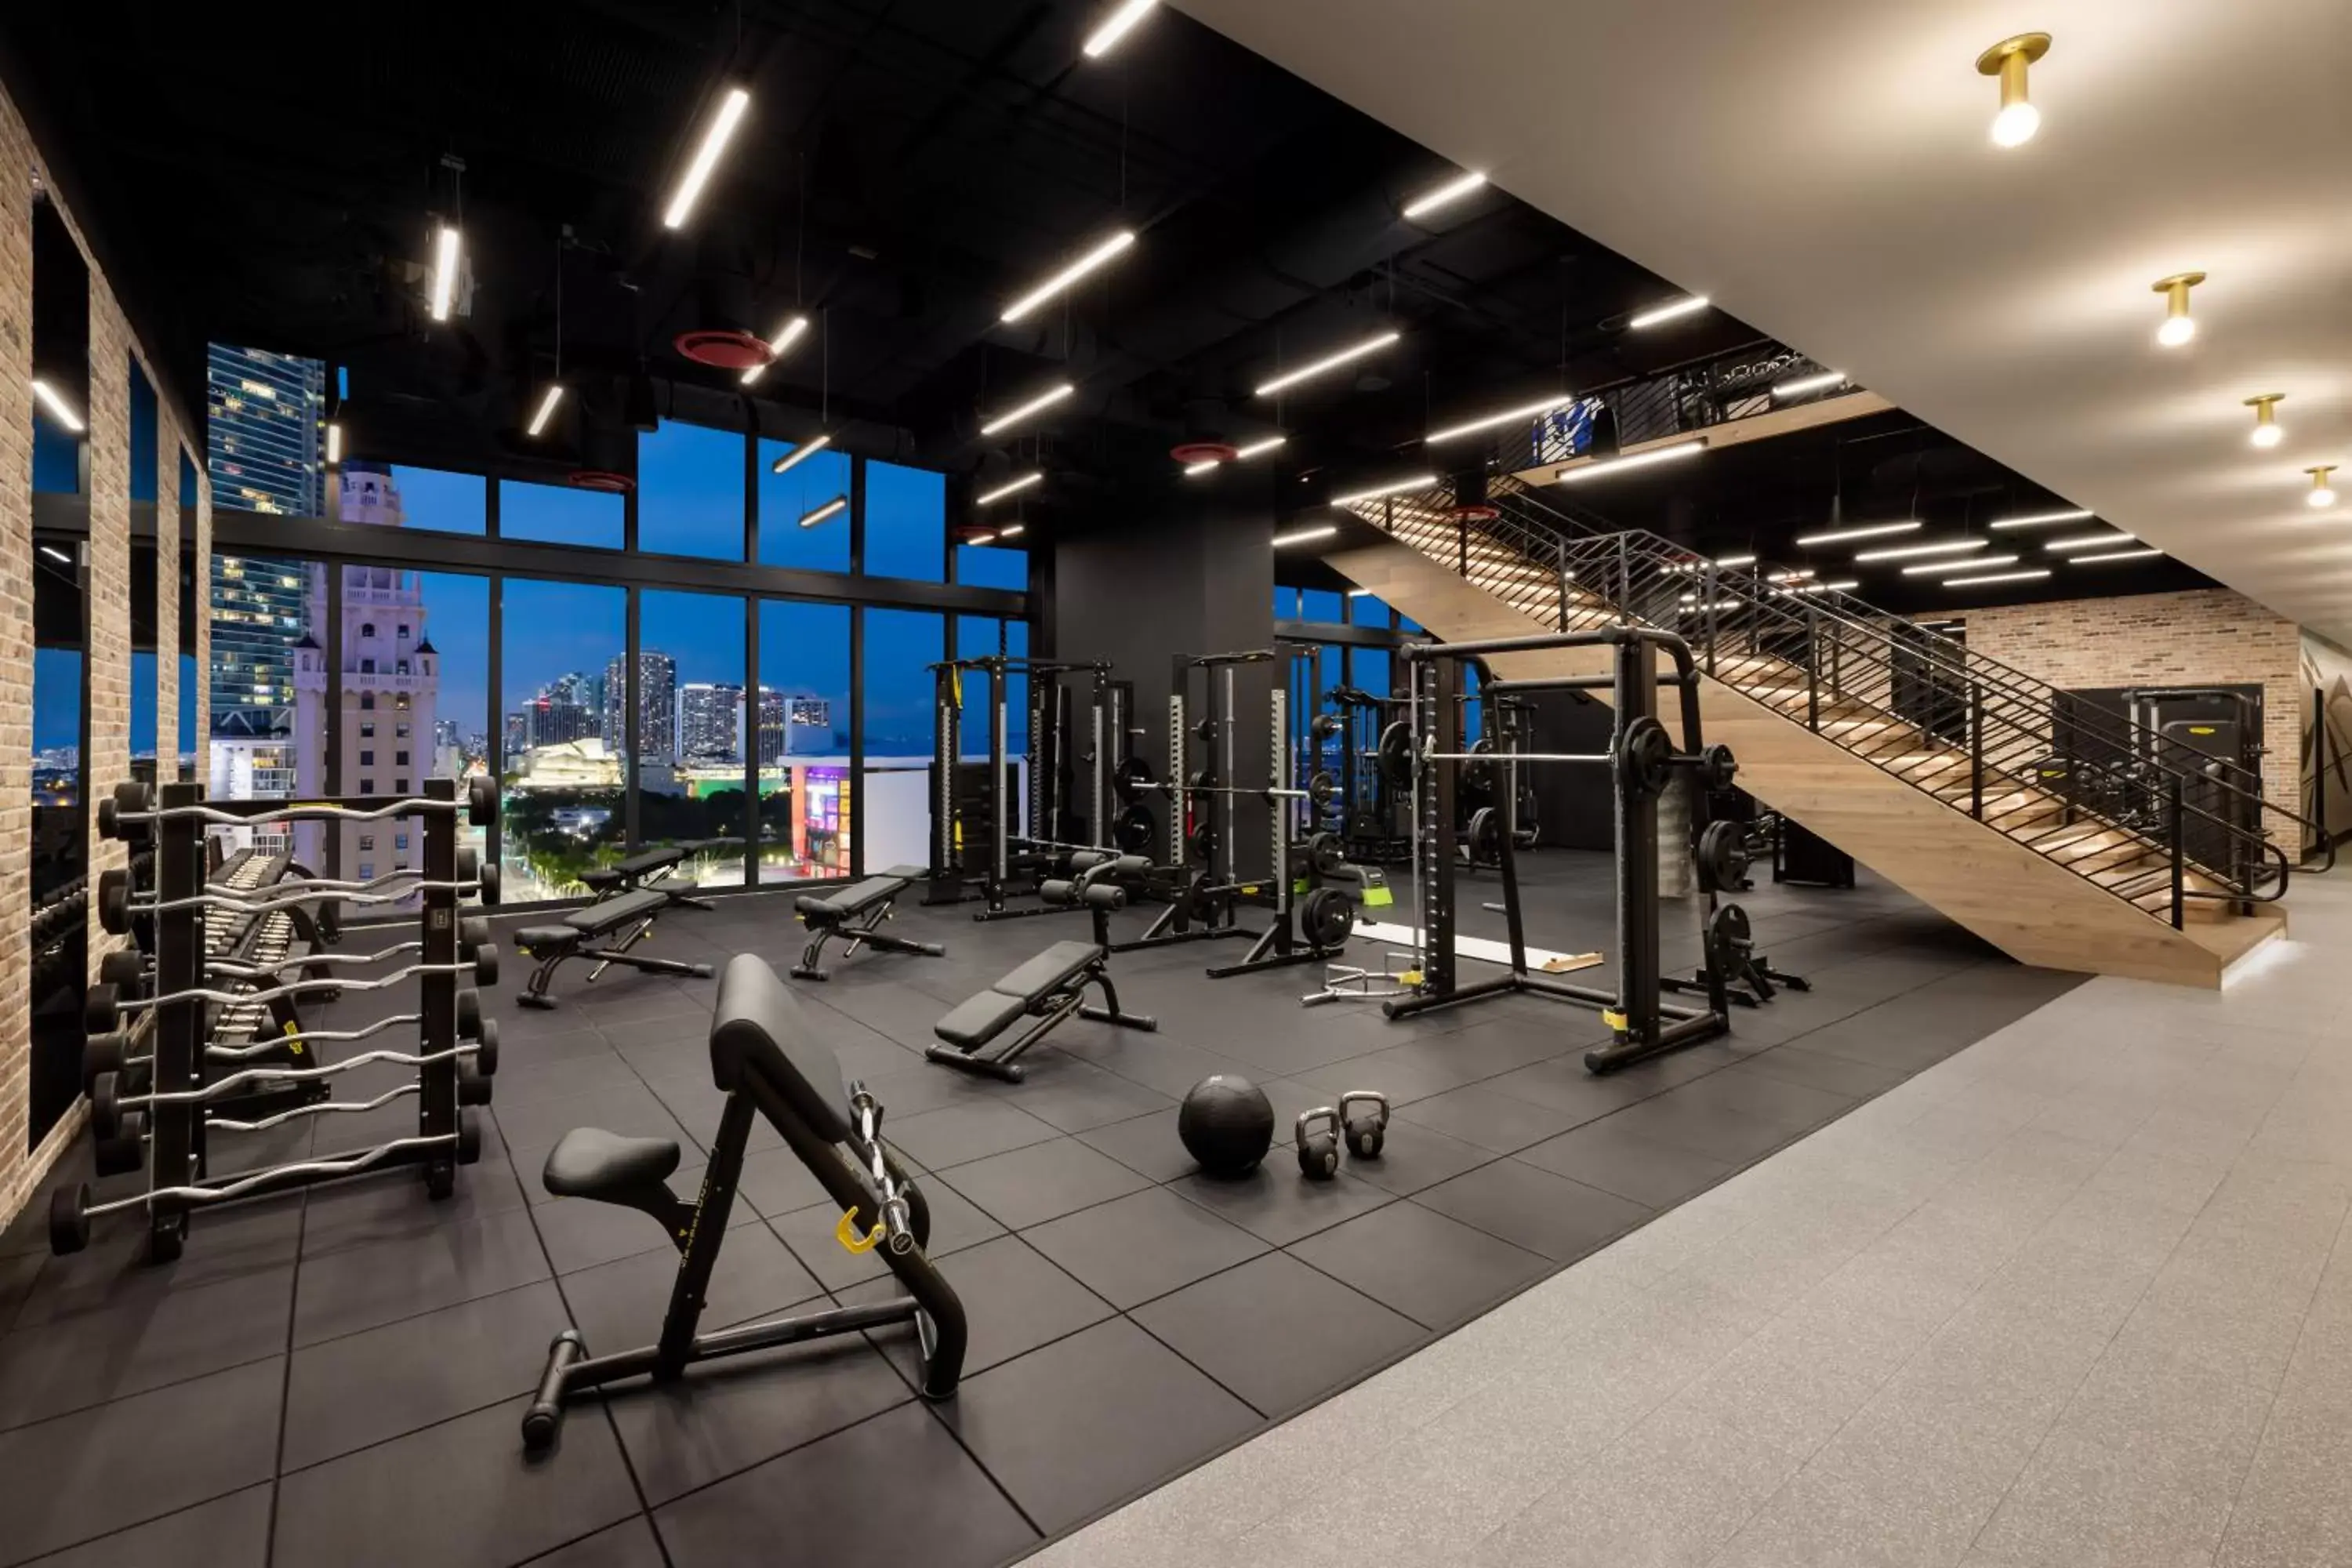 Fitness centre/facilities, Fitness Center/Facilities in The Elser Hotel Miami